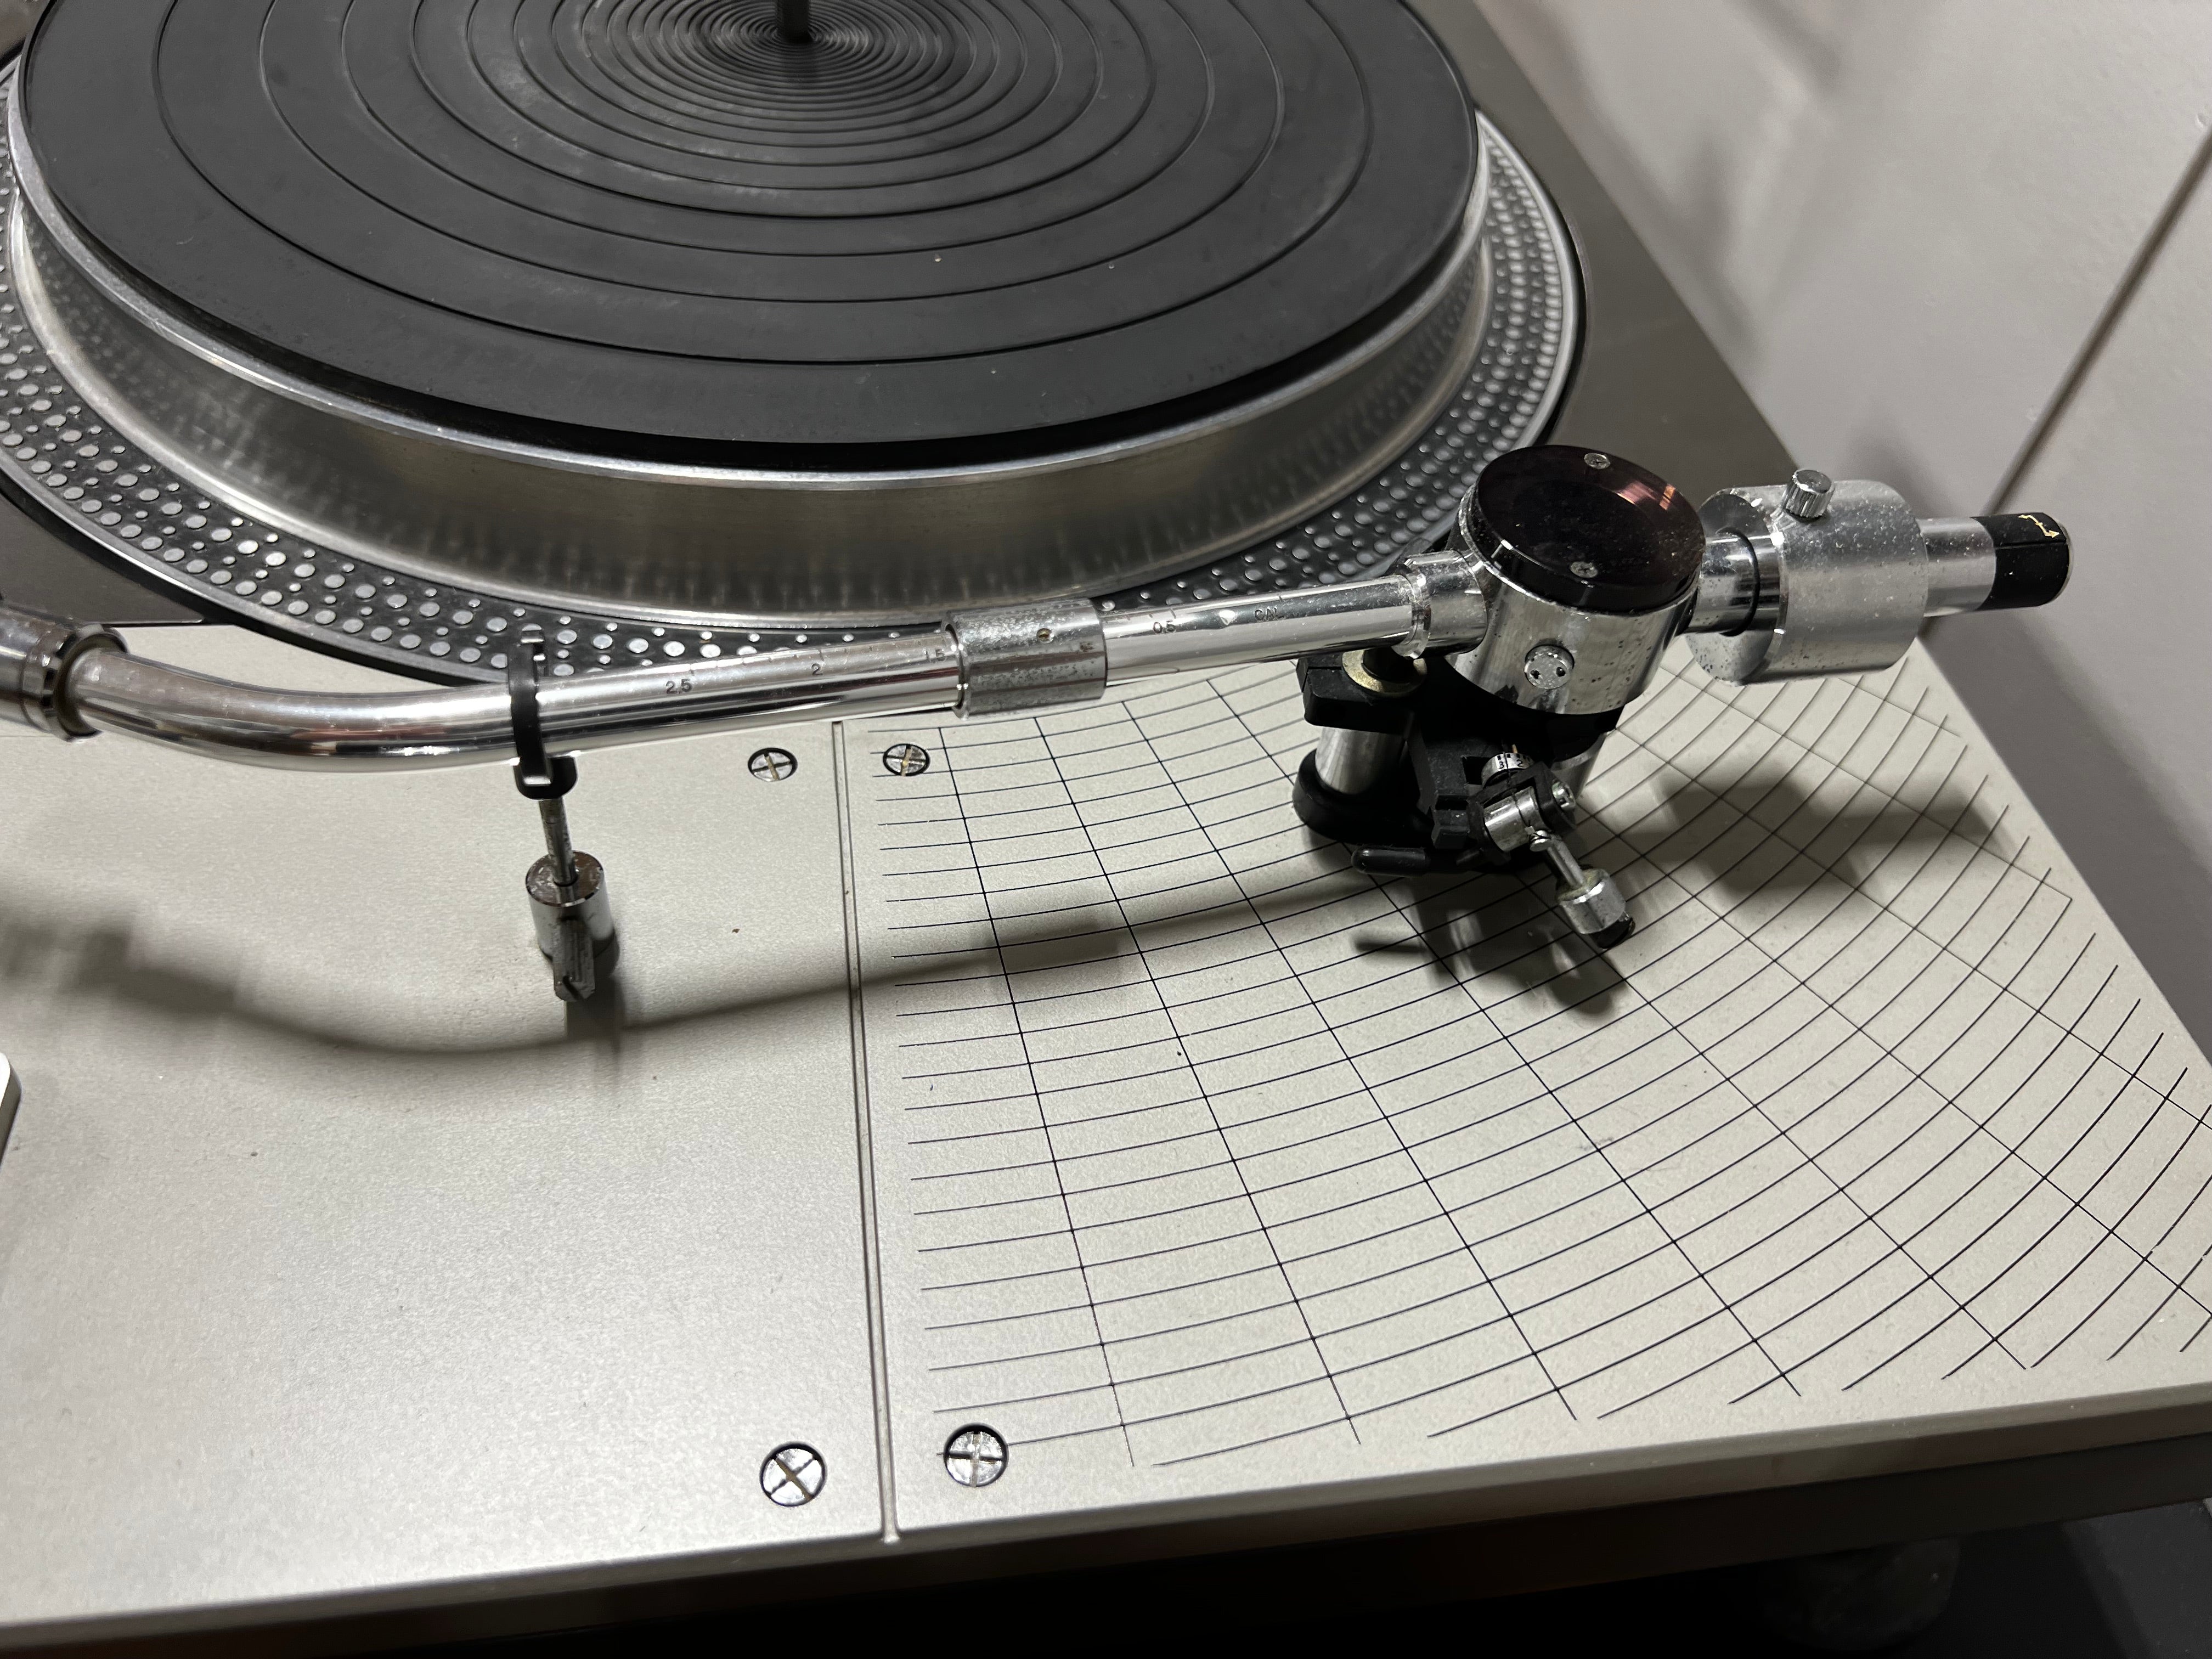 Technics SL-110A, Reference Turntable